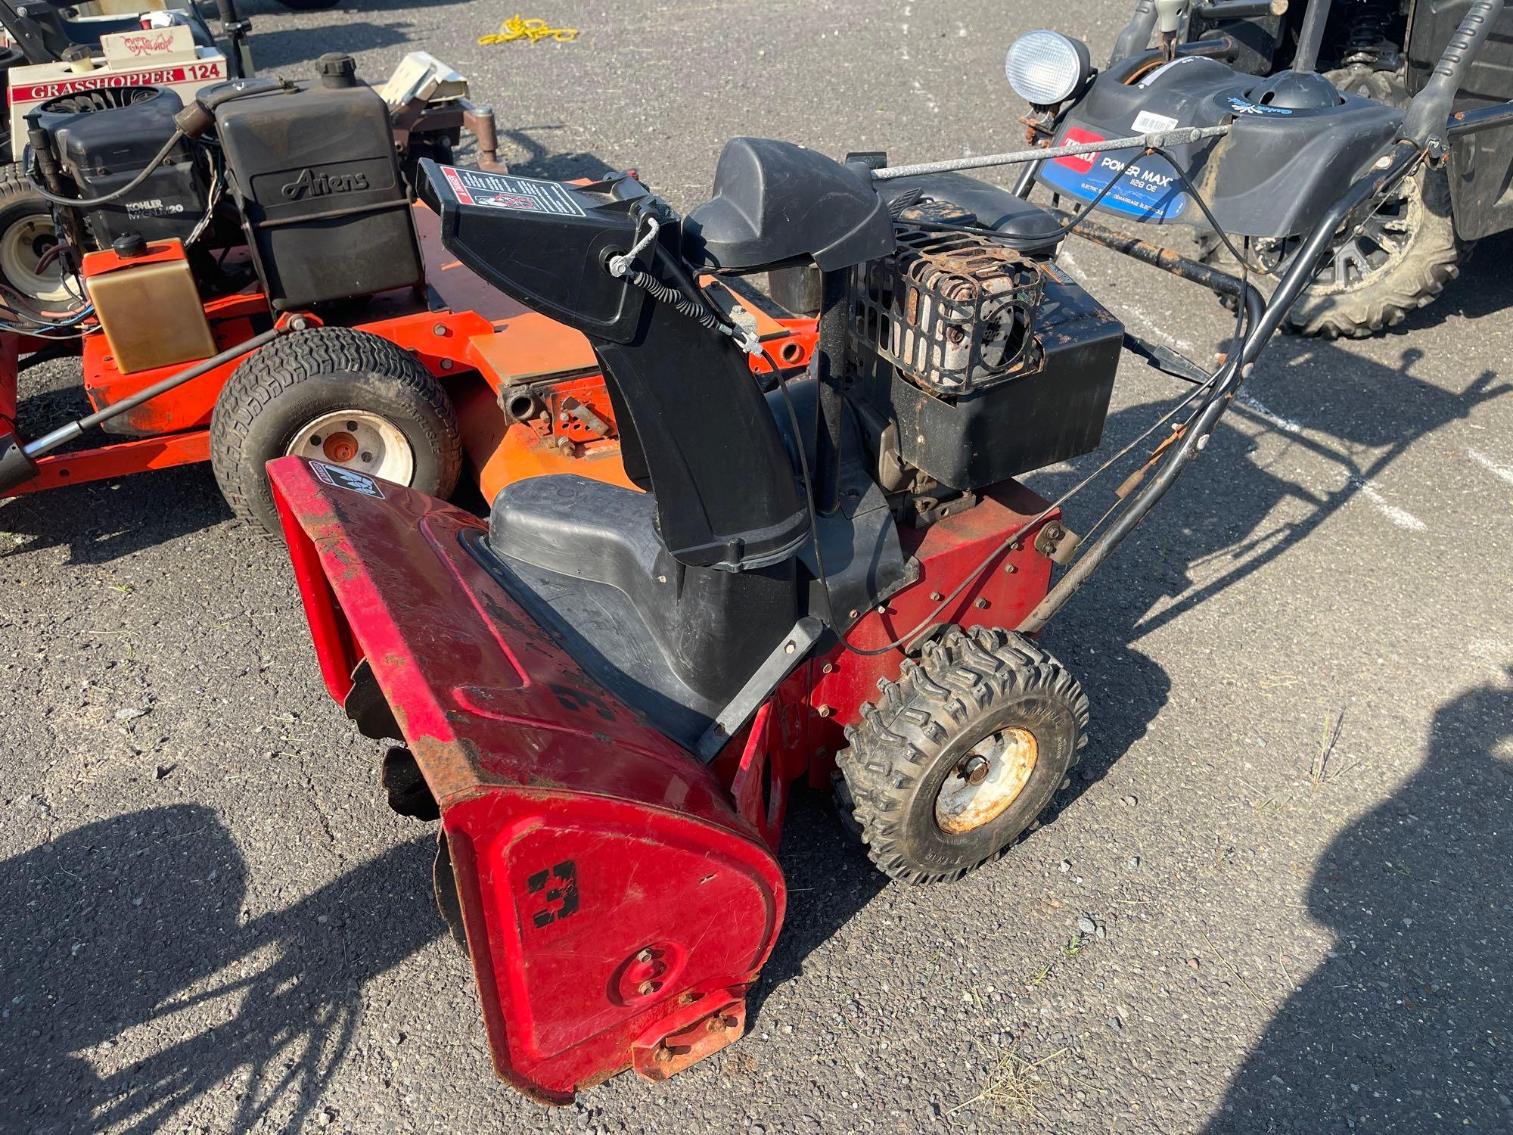 Image for TORO Pro Max 1128 OE Snow Blower- per seller: runs, pull cord broke will start with electric start